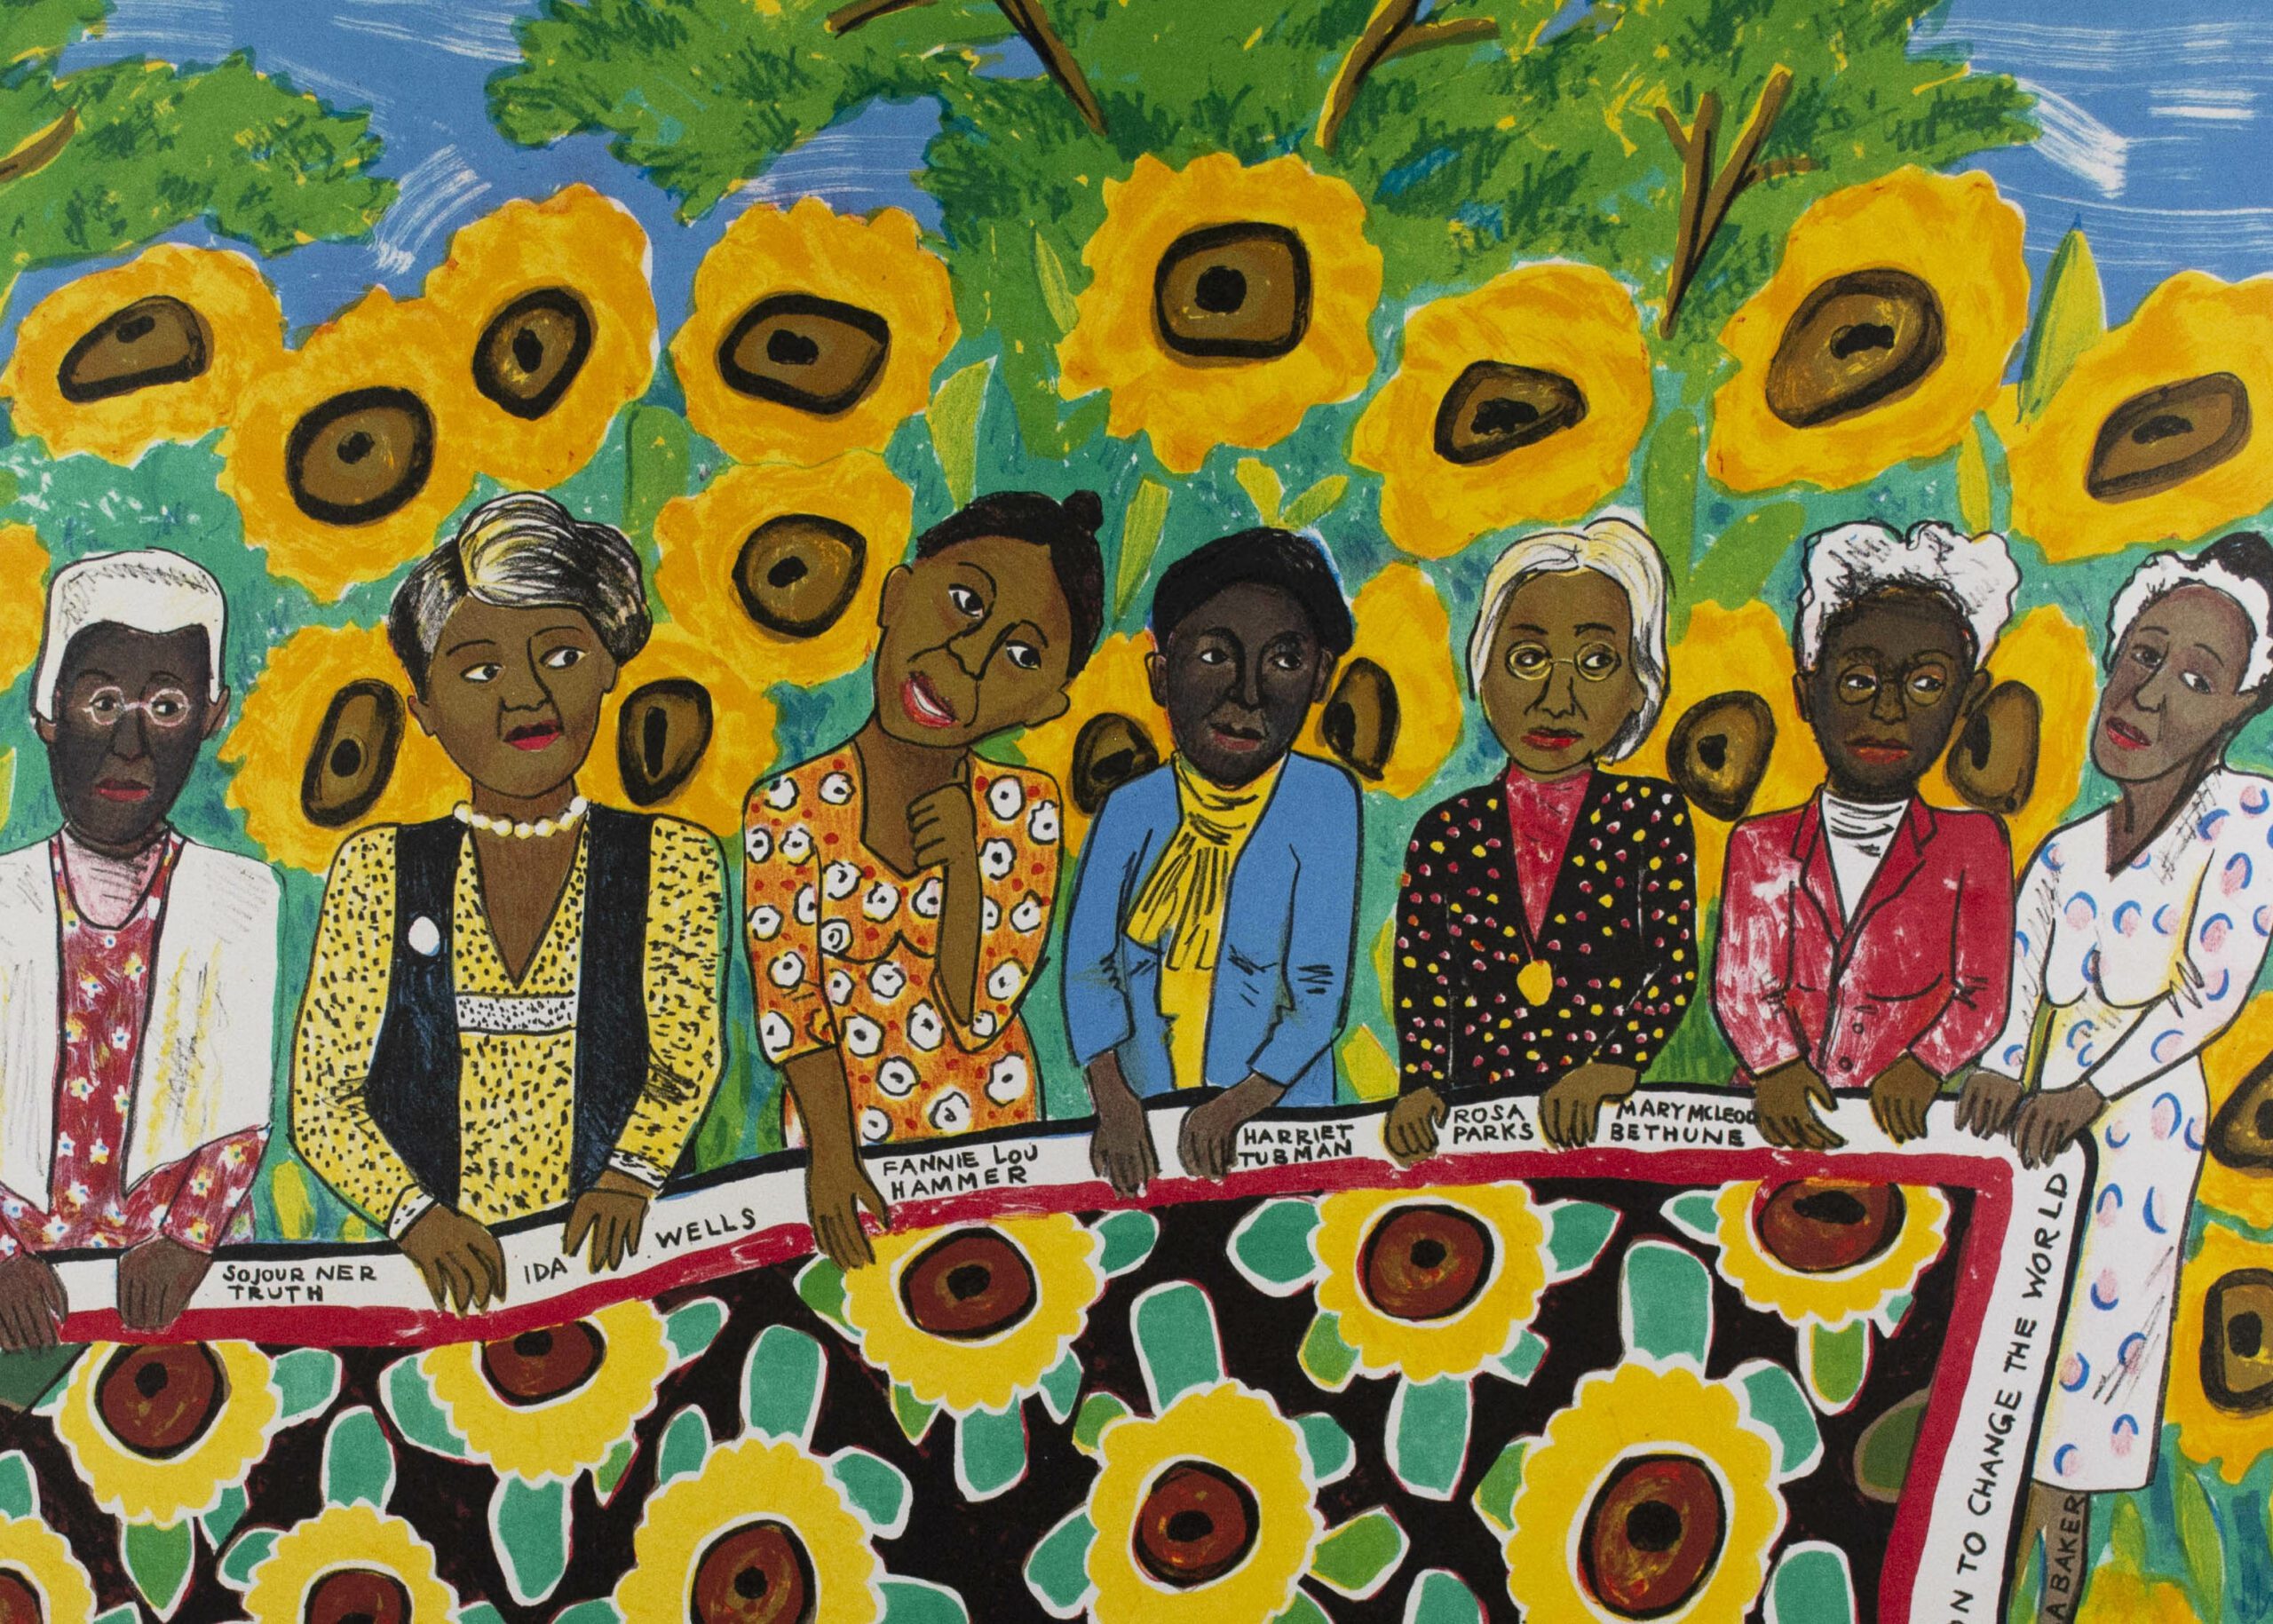 Print of sunflowers surrounding a grouping of African American women holding onto a quilt also made of sunflowers.